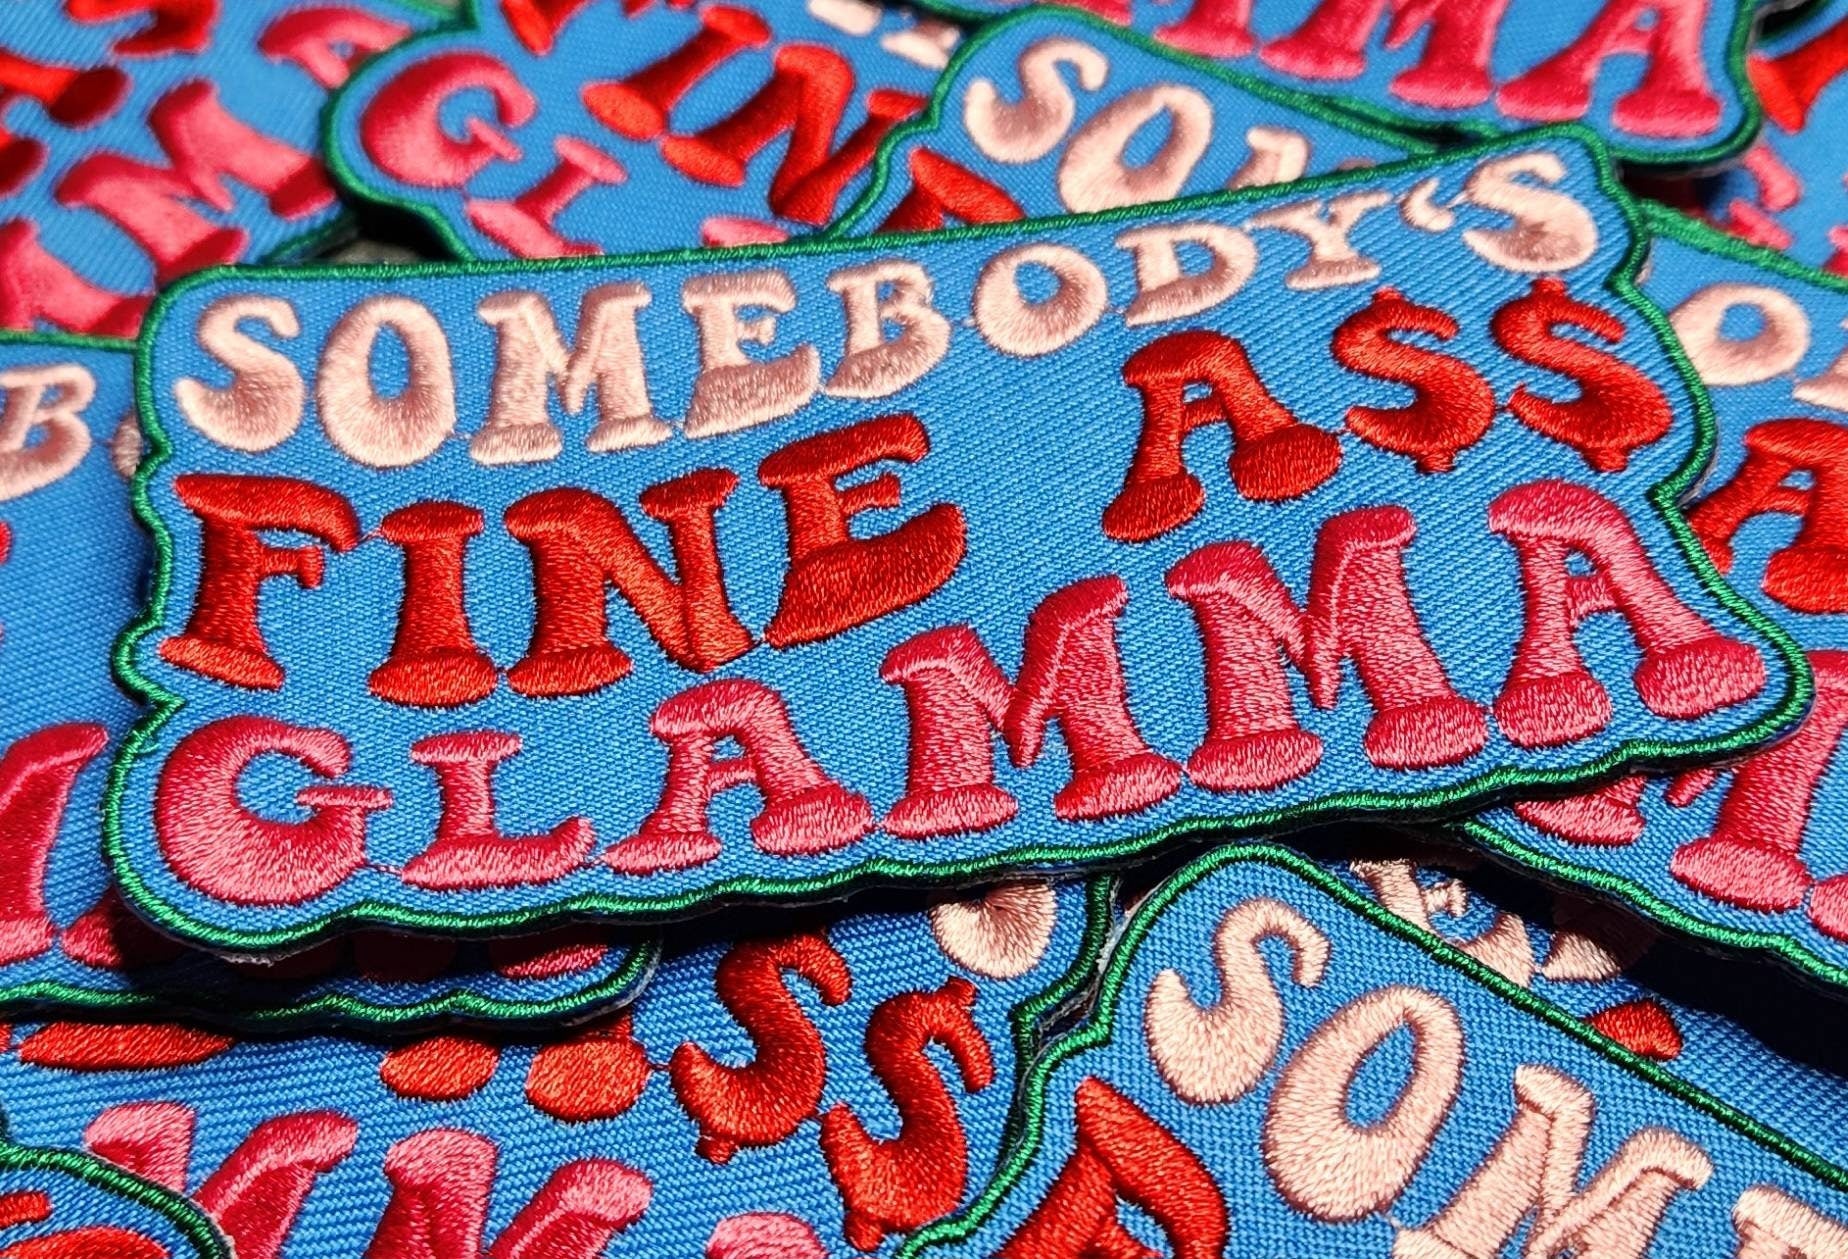 Funny, Cute, and Colorful Embroidered Patches